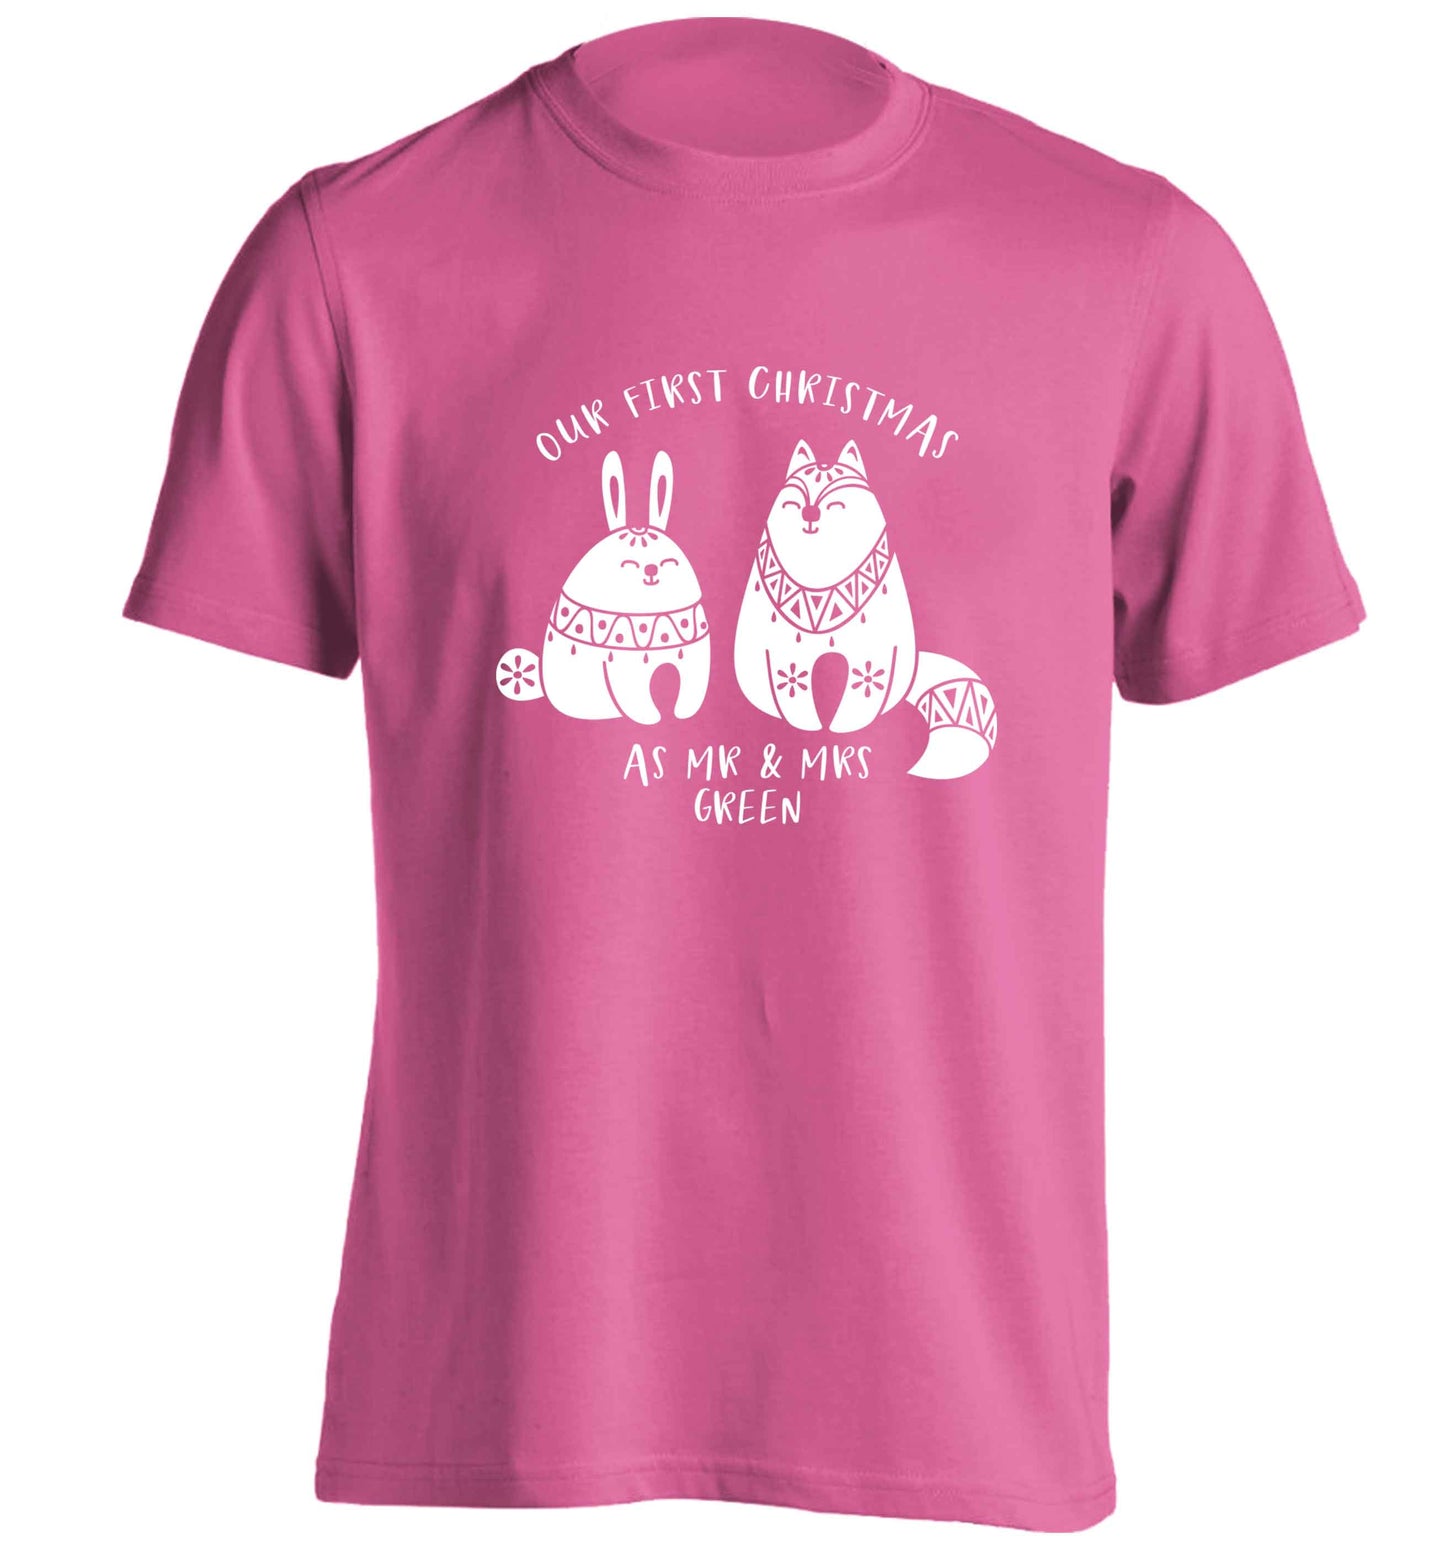 Our first Christmas as Mr & Mrs personalised adults unisex pink Tshirt 2XL